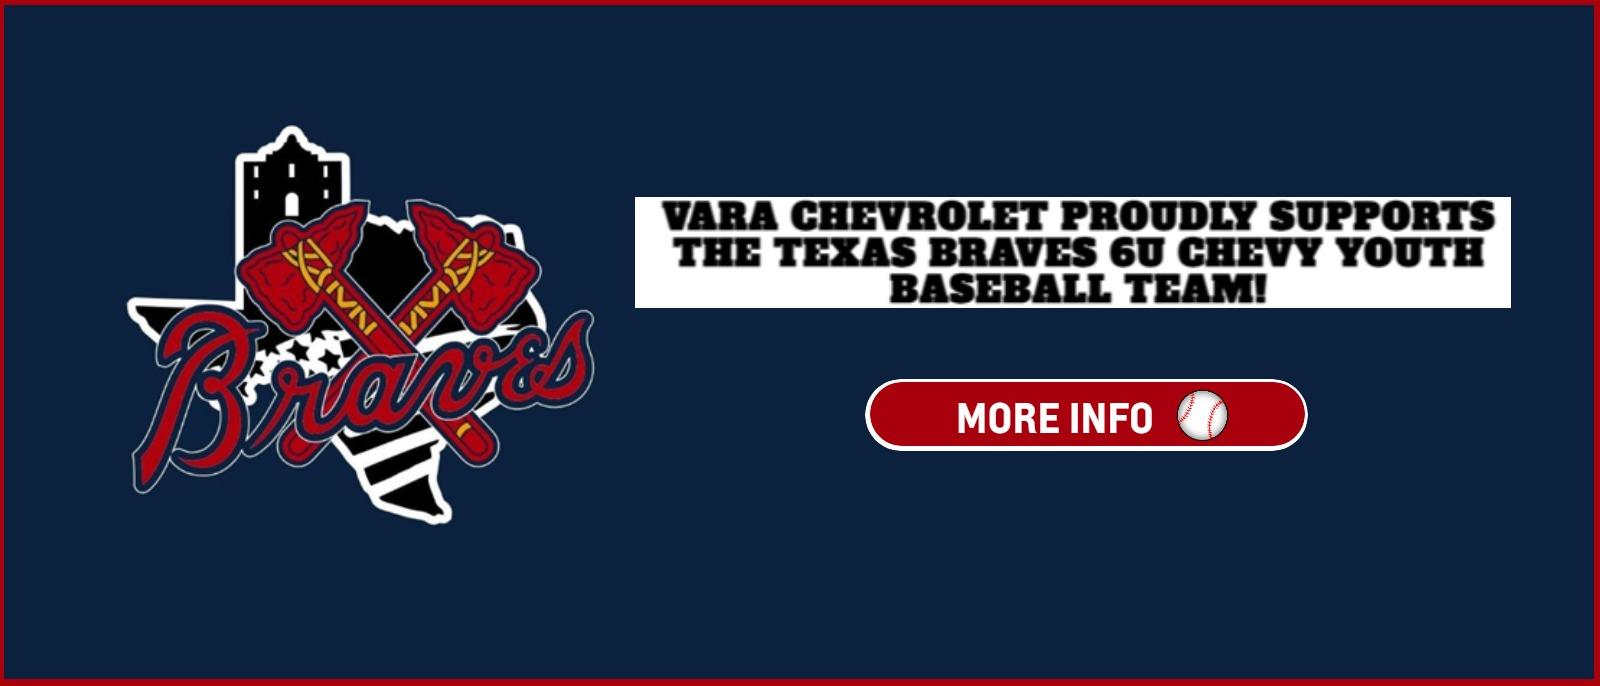 VARA CHEVROLET PROUDLY SUPPORTS THE TEXAS BRAVES CHEVY YOUTH BASEBALL TEAM